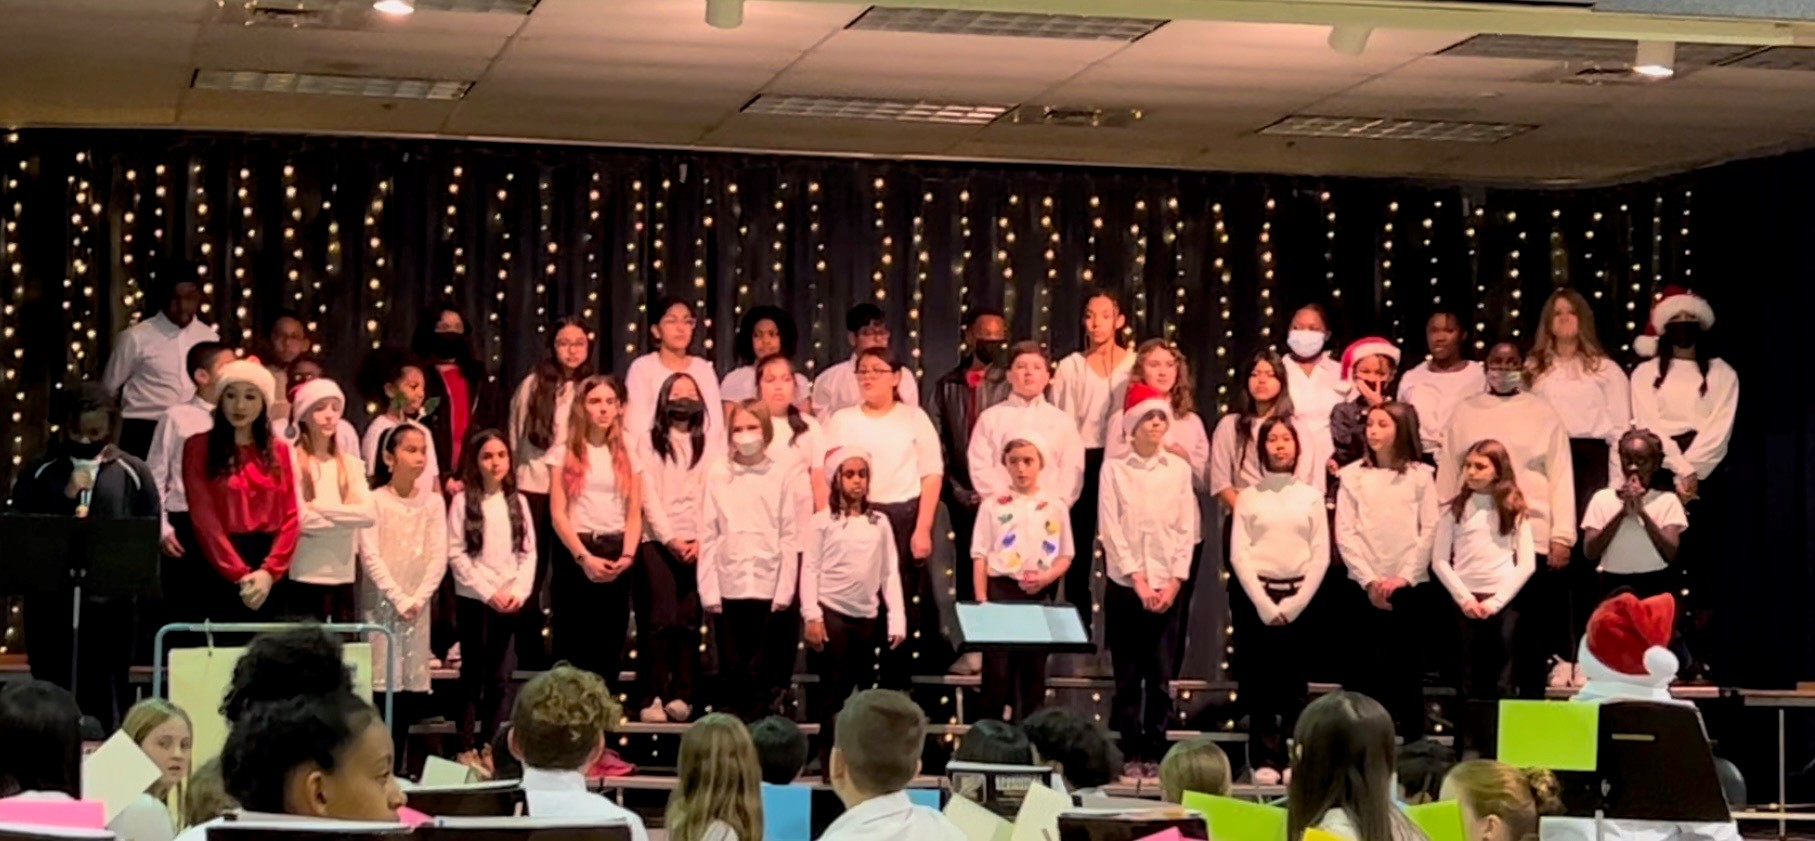 ms wildermuth and the chorus on stage